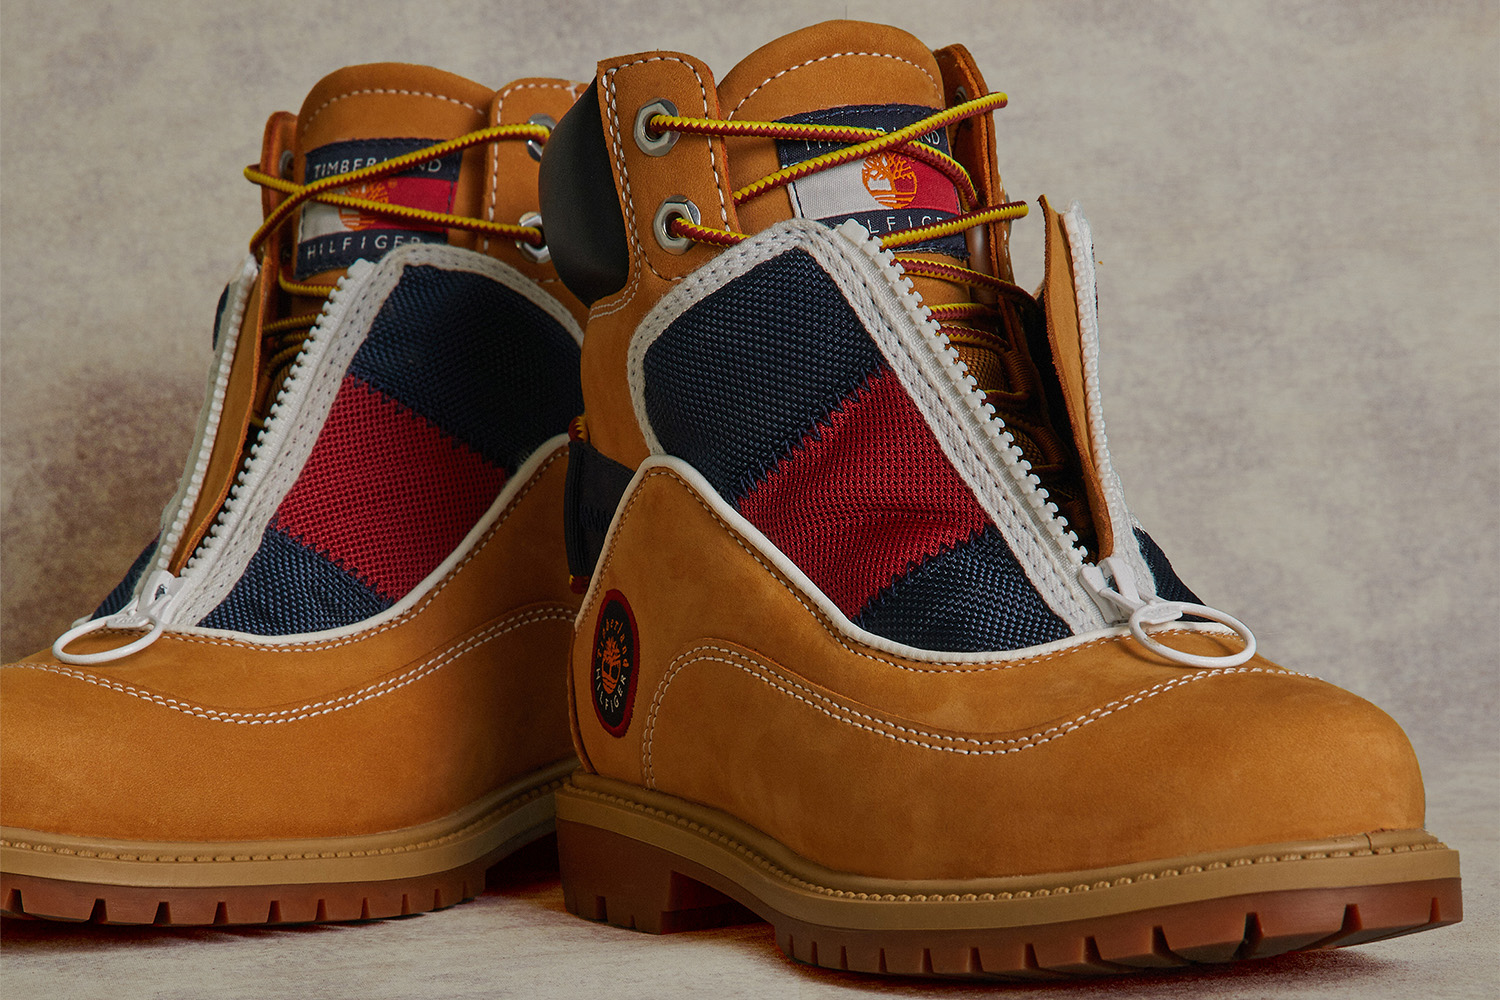 a classic timberland 6-inch wheat colored boot with Tommy Hilfiger detailing